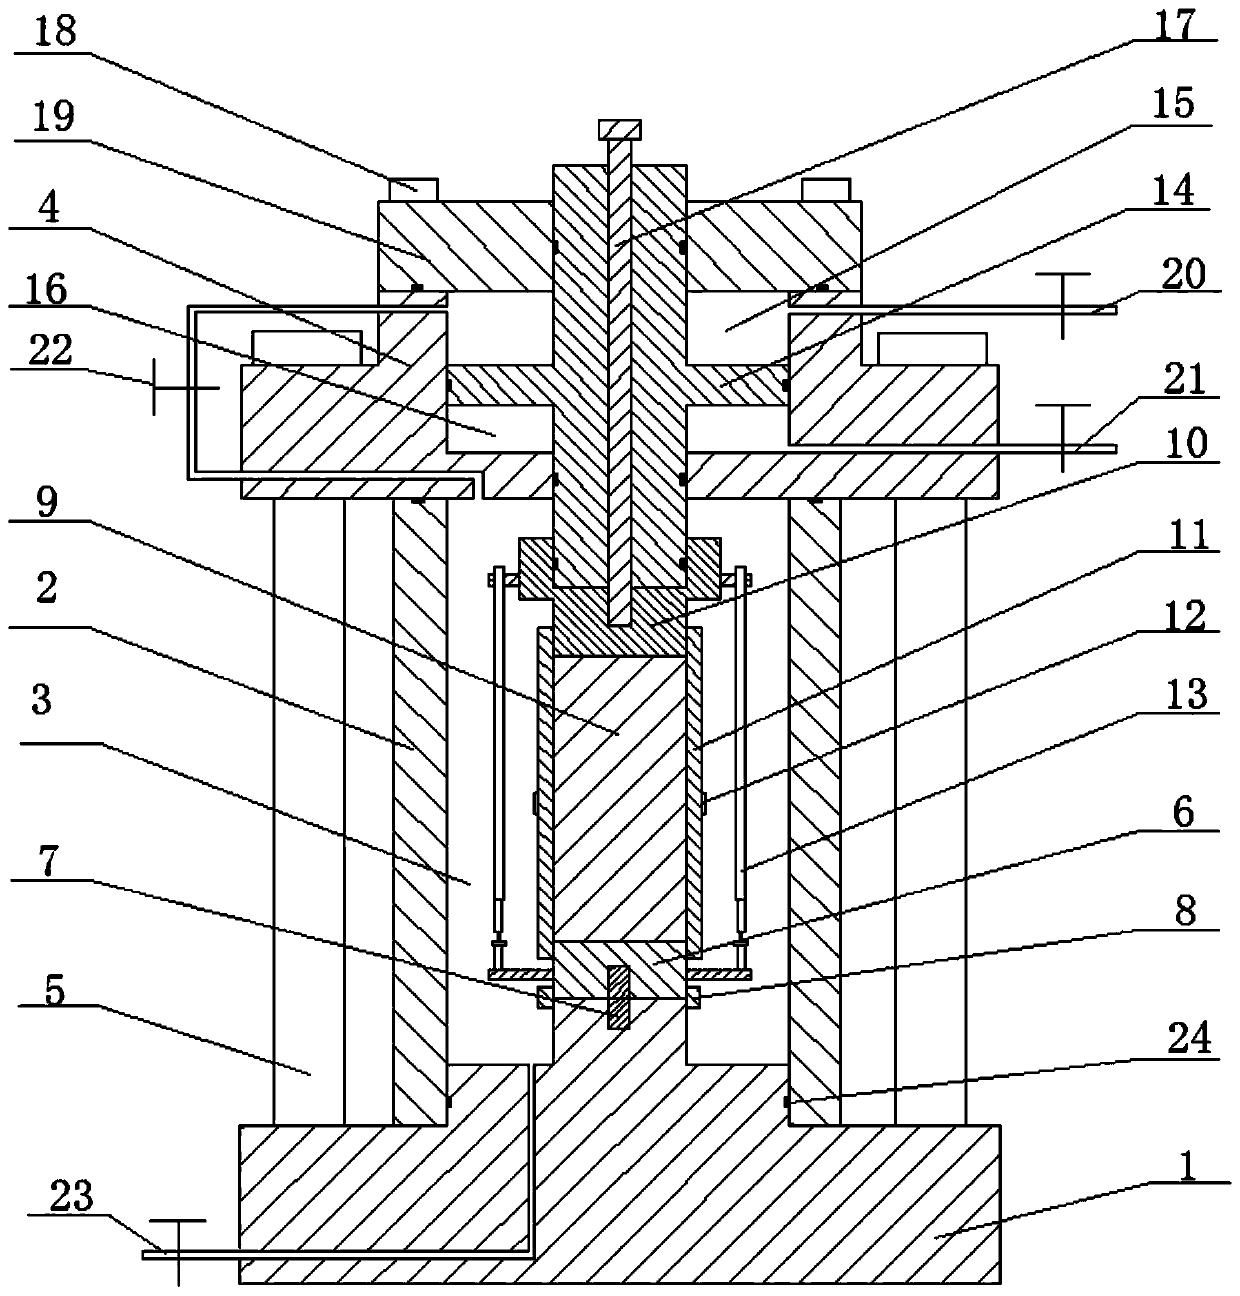 Rock triaxial direct stretching indoor experimental device and method